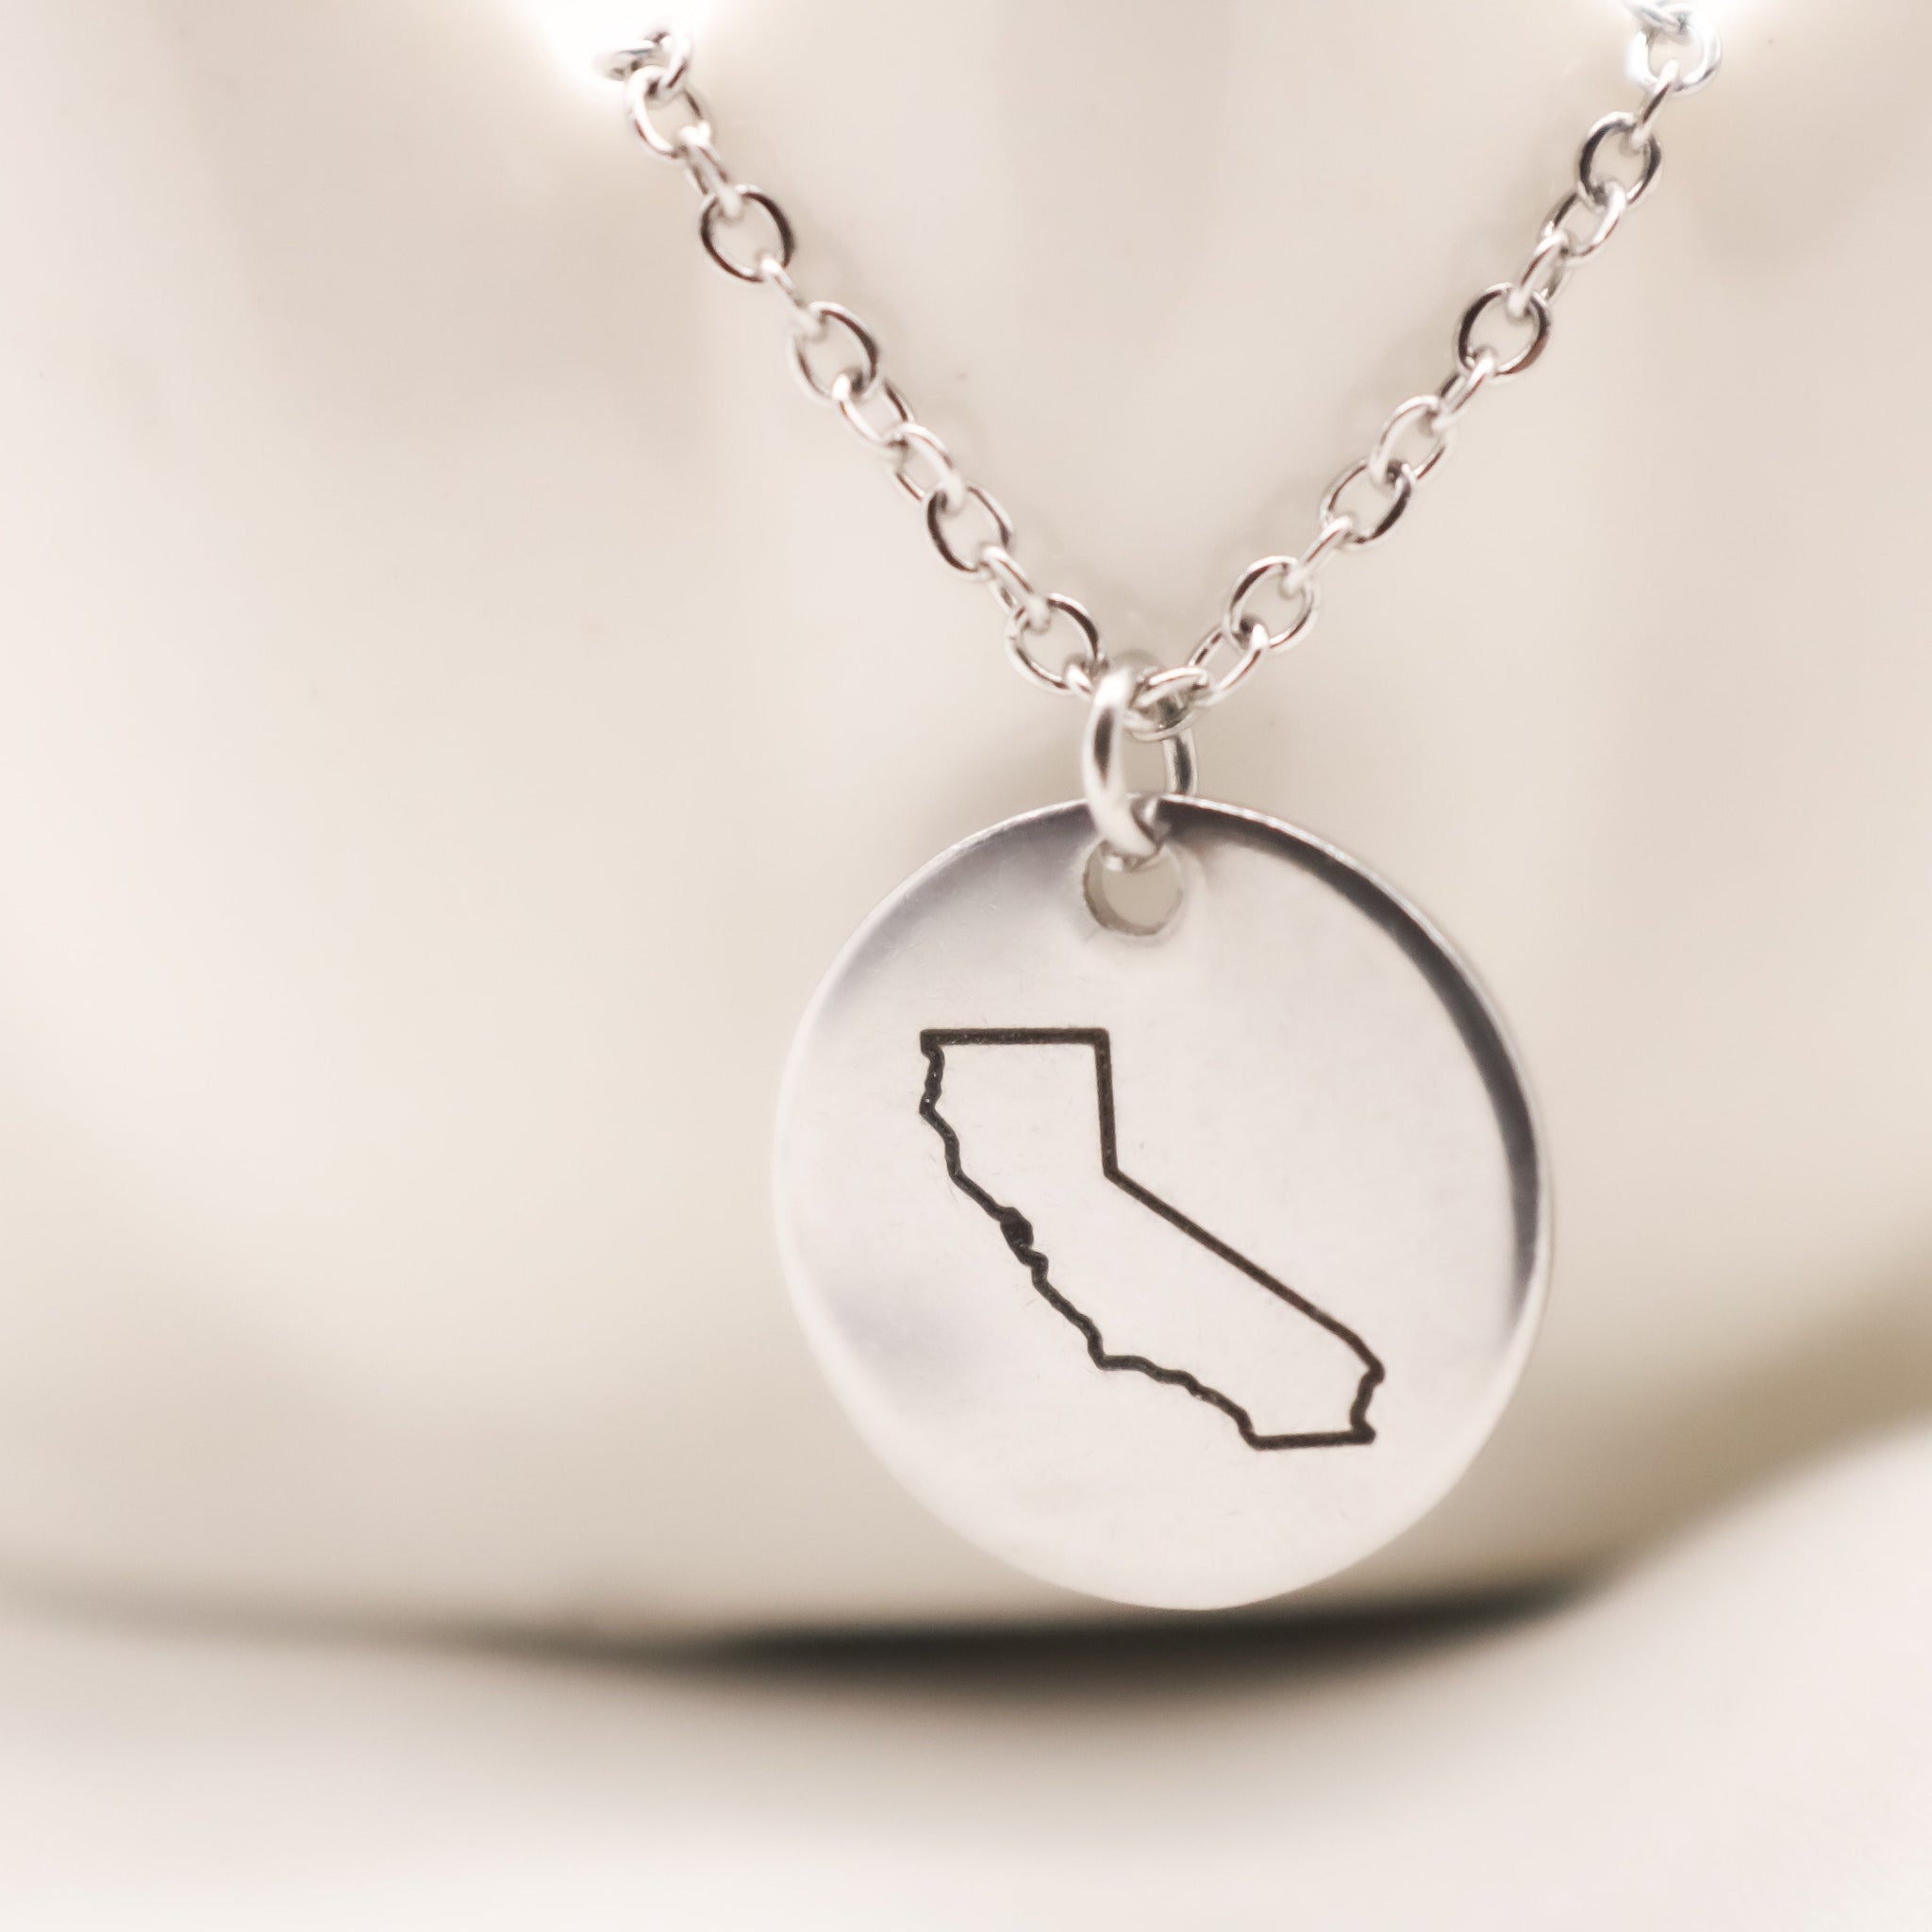 Personalized State Necklace, Best Friend Gifts, Long Distance Relationship, State Necklace Disc 15mm